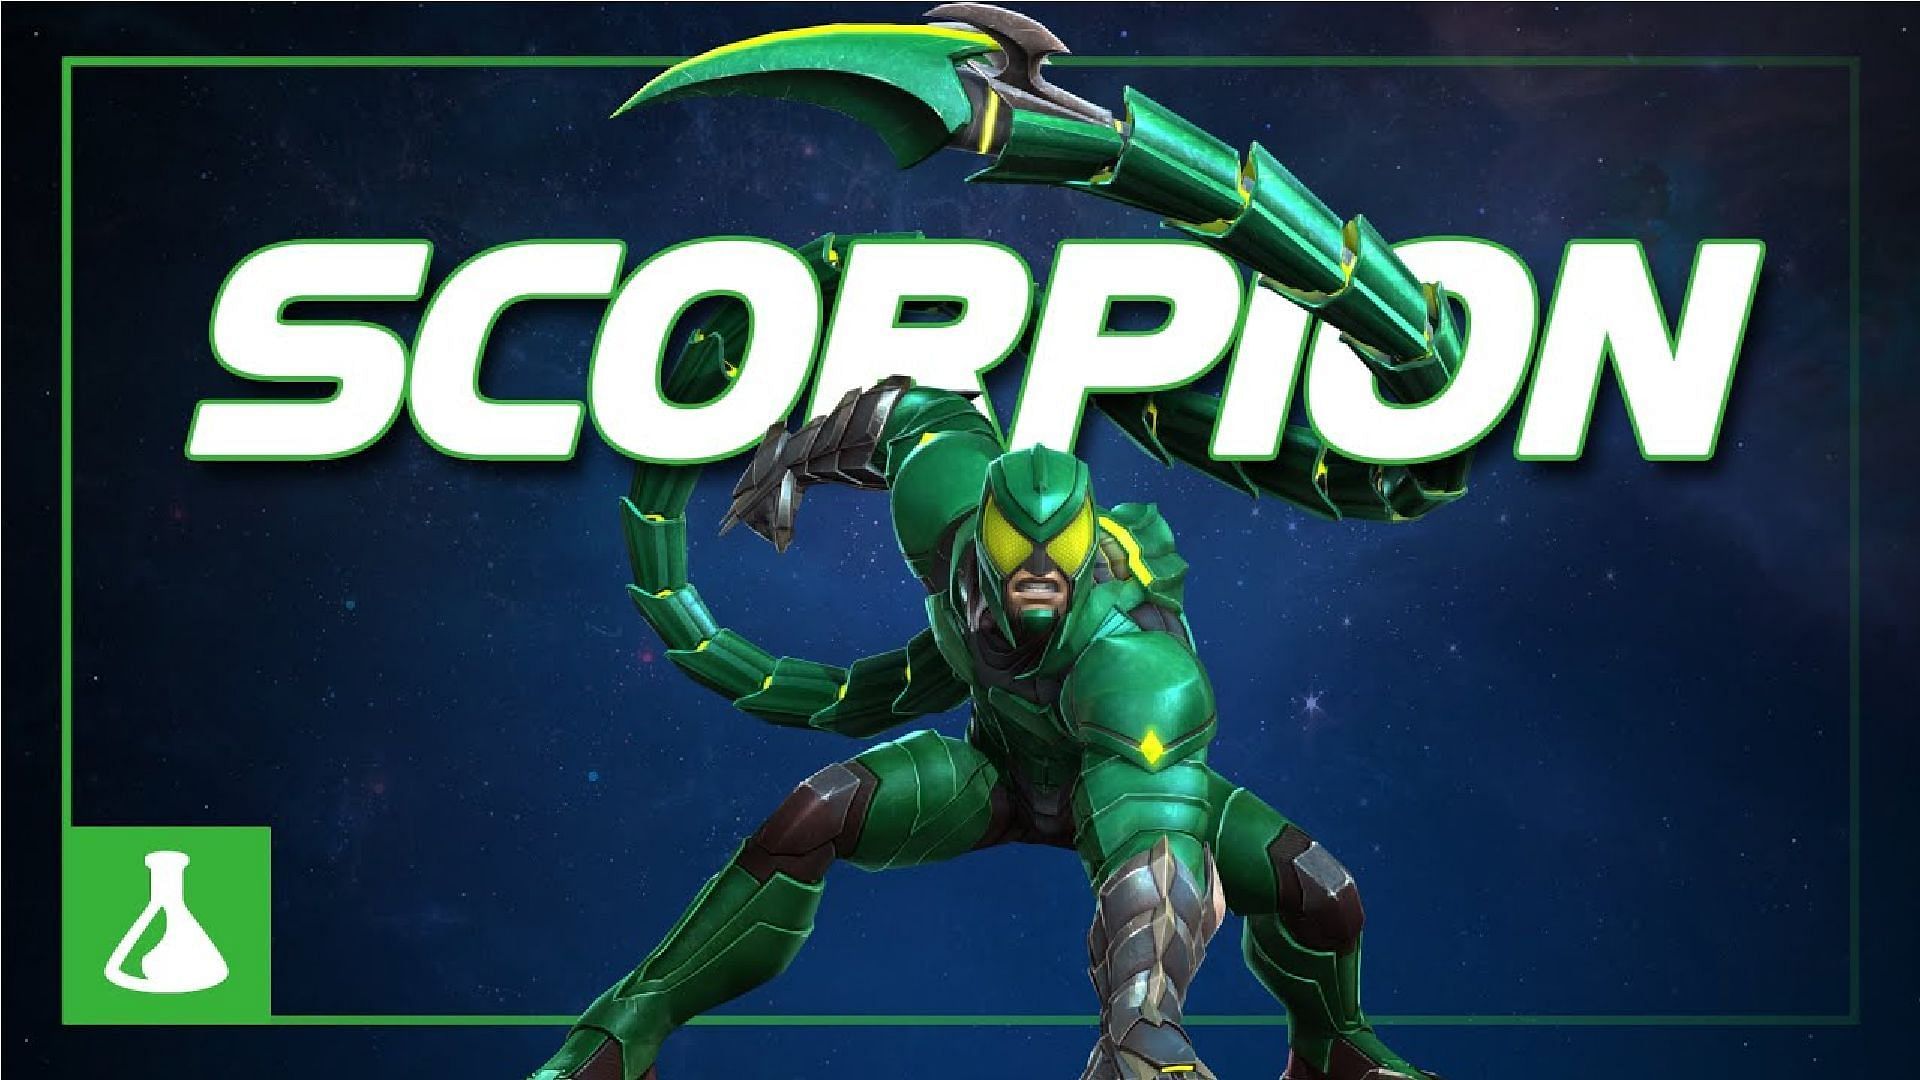 Scorpion provides players with a reliable option in their team (Image via Kabam)